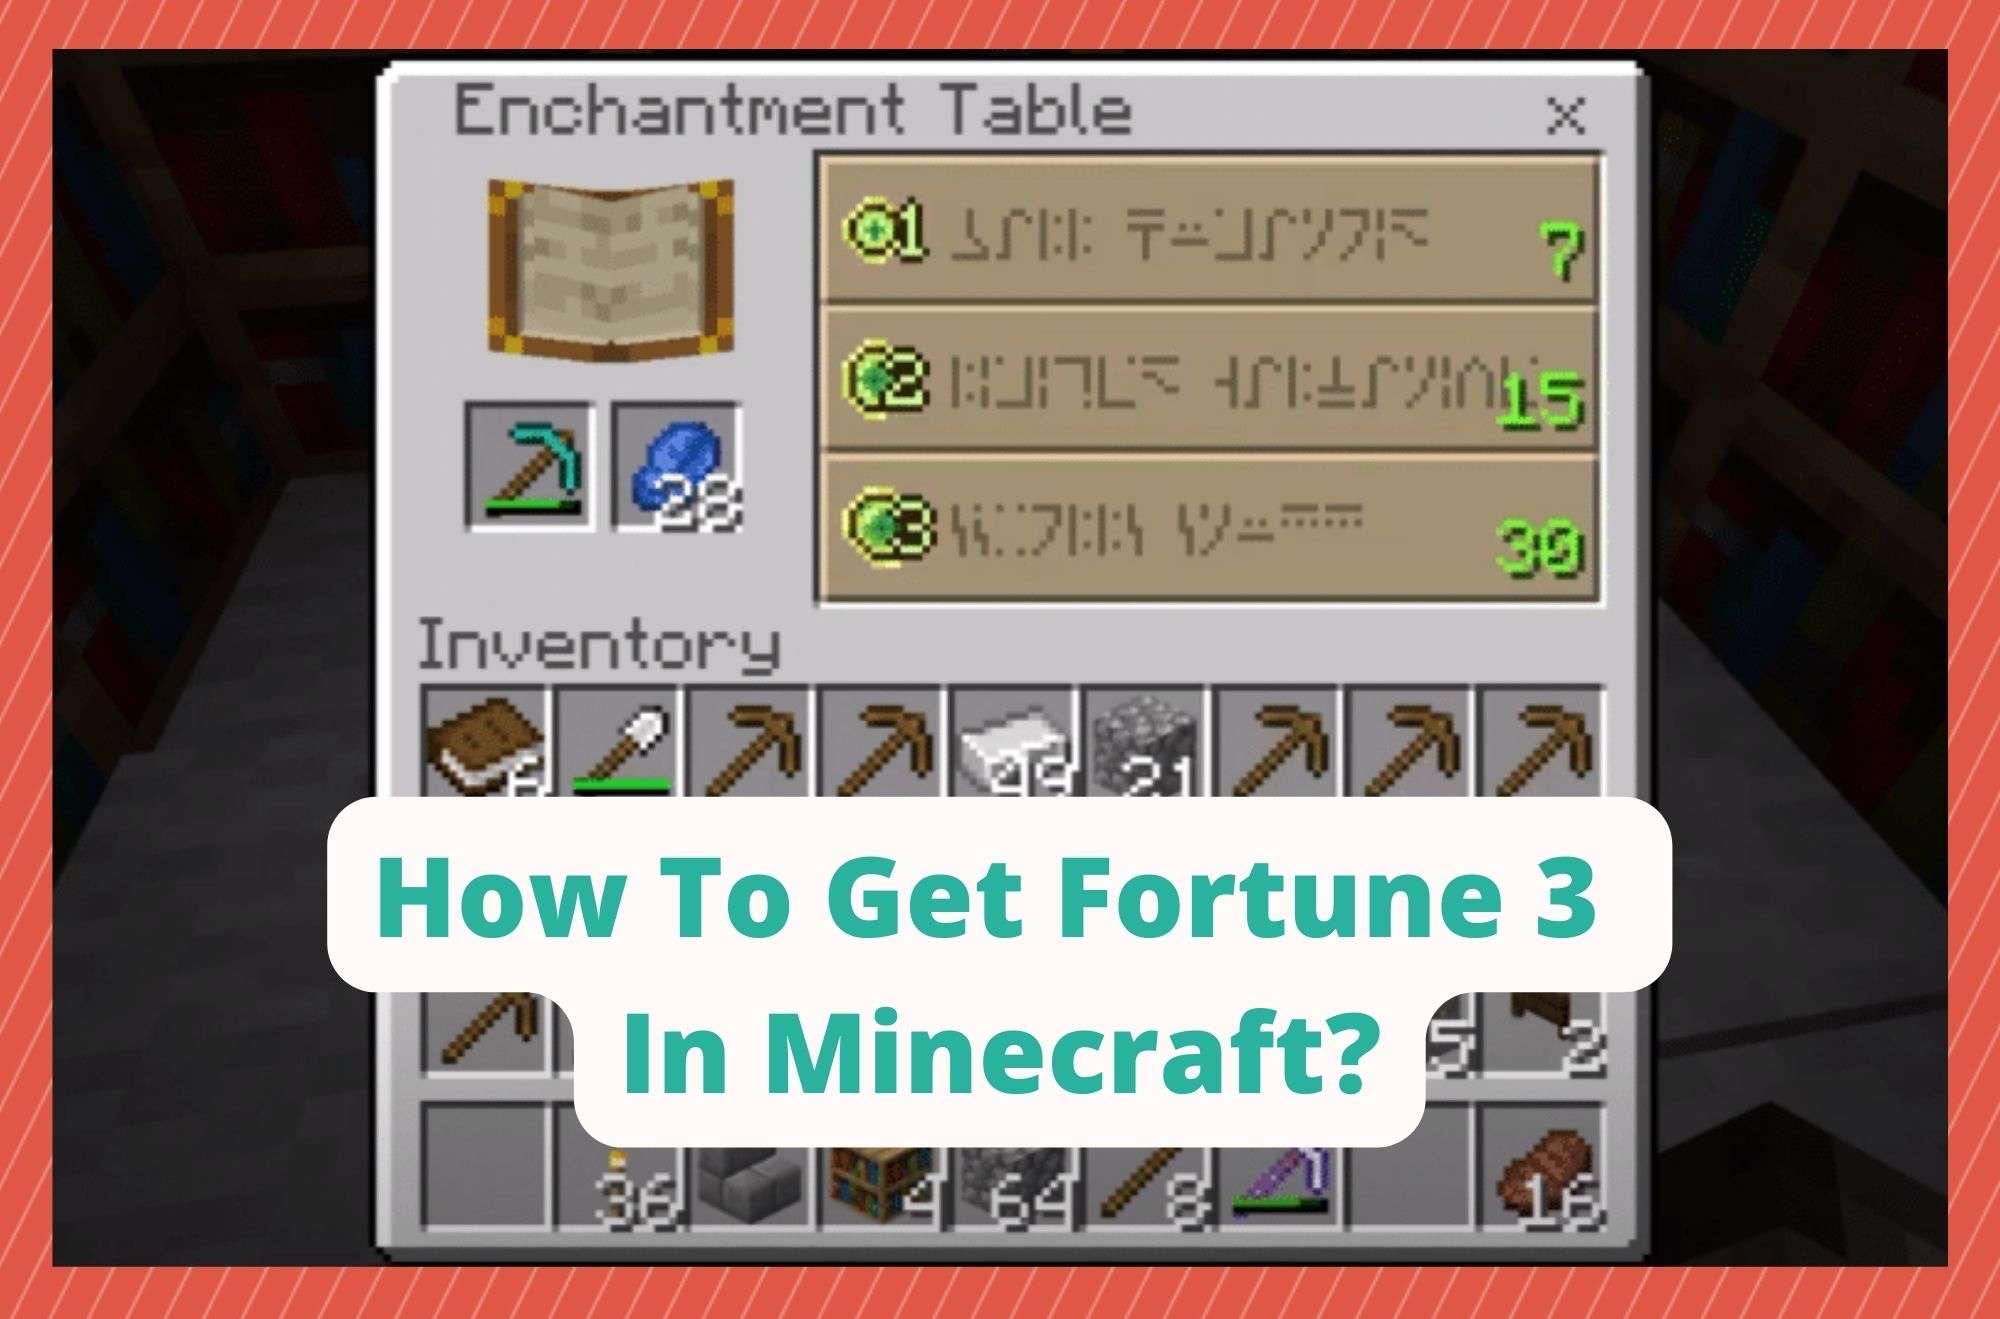 How To Get Fortune 3